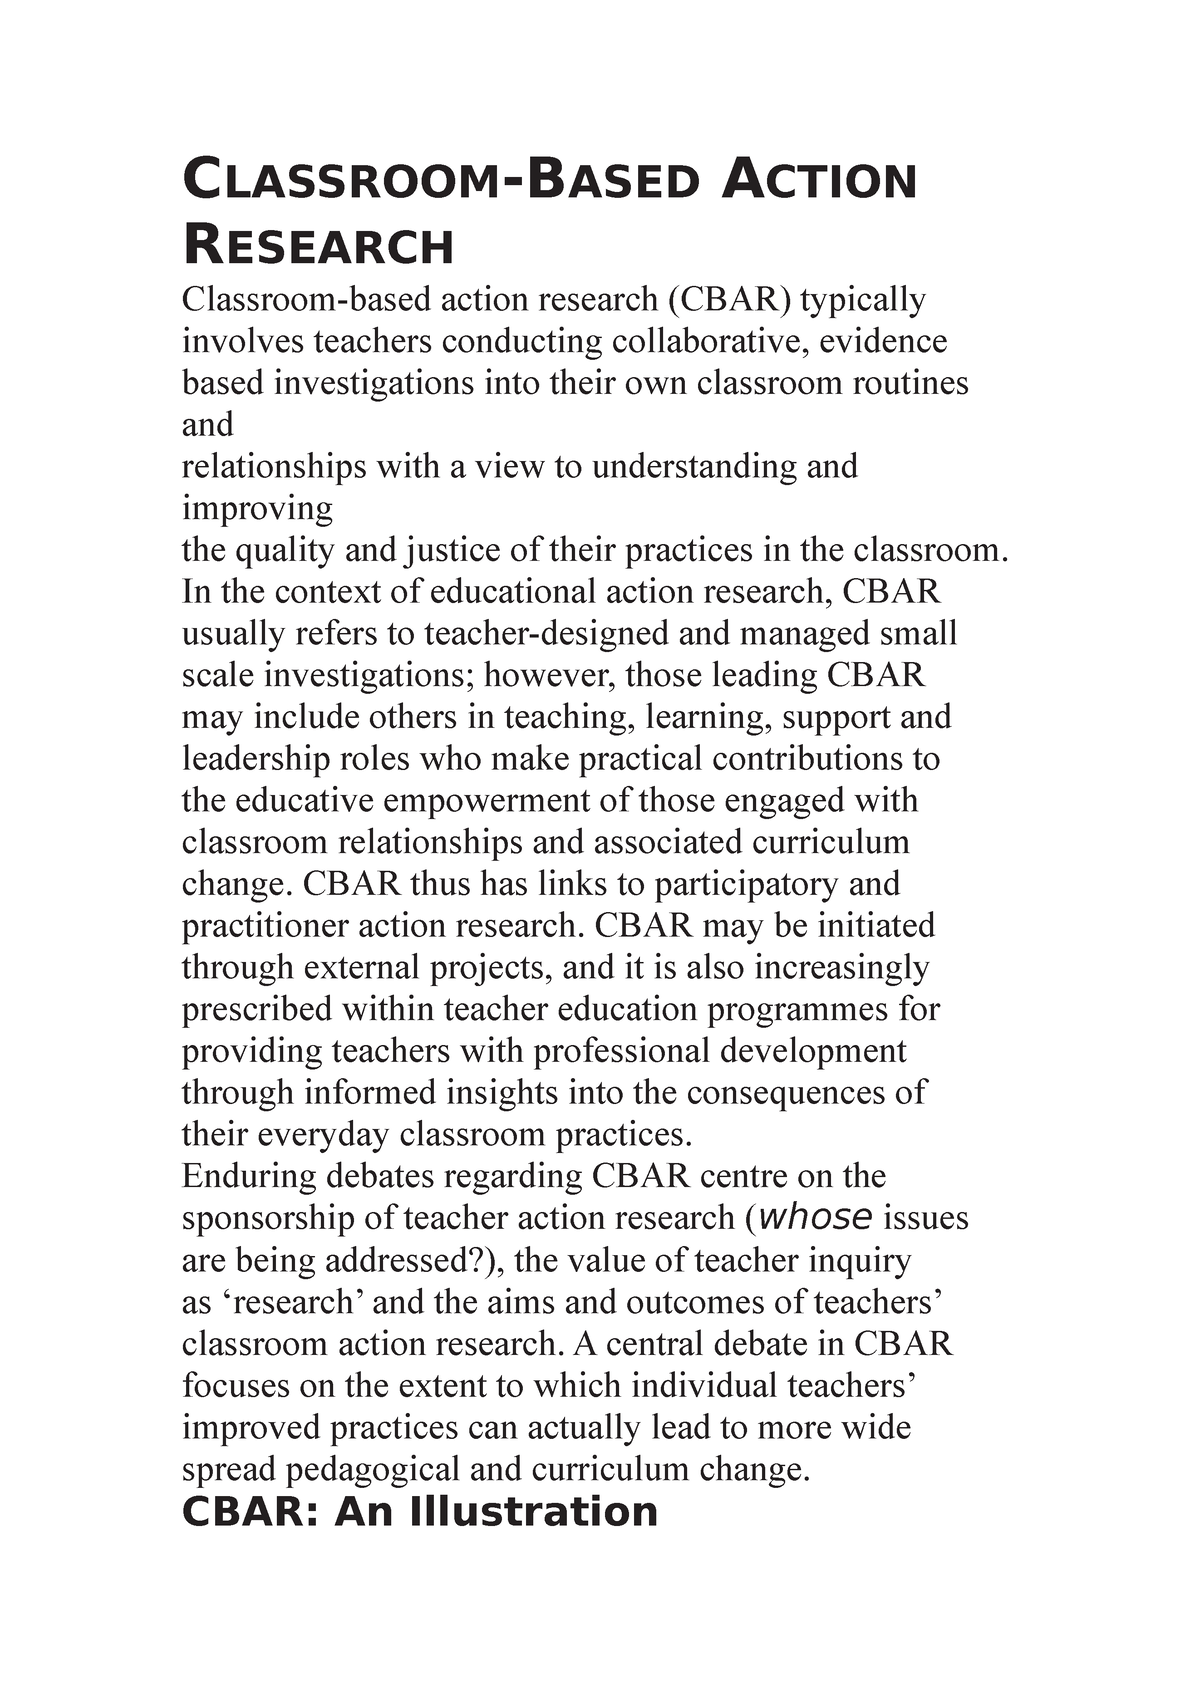 example of classroom action research proposal in mathematics